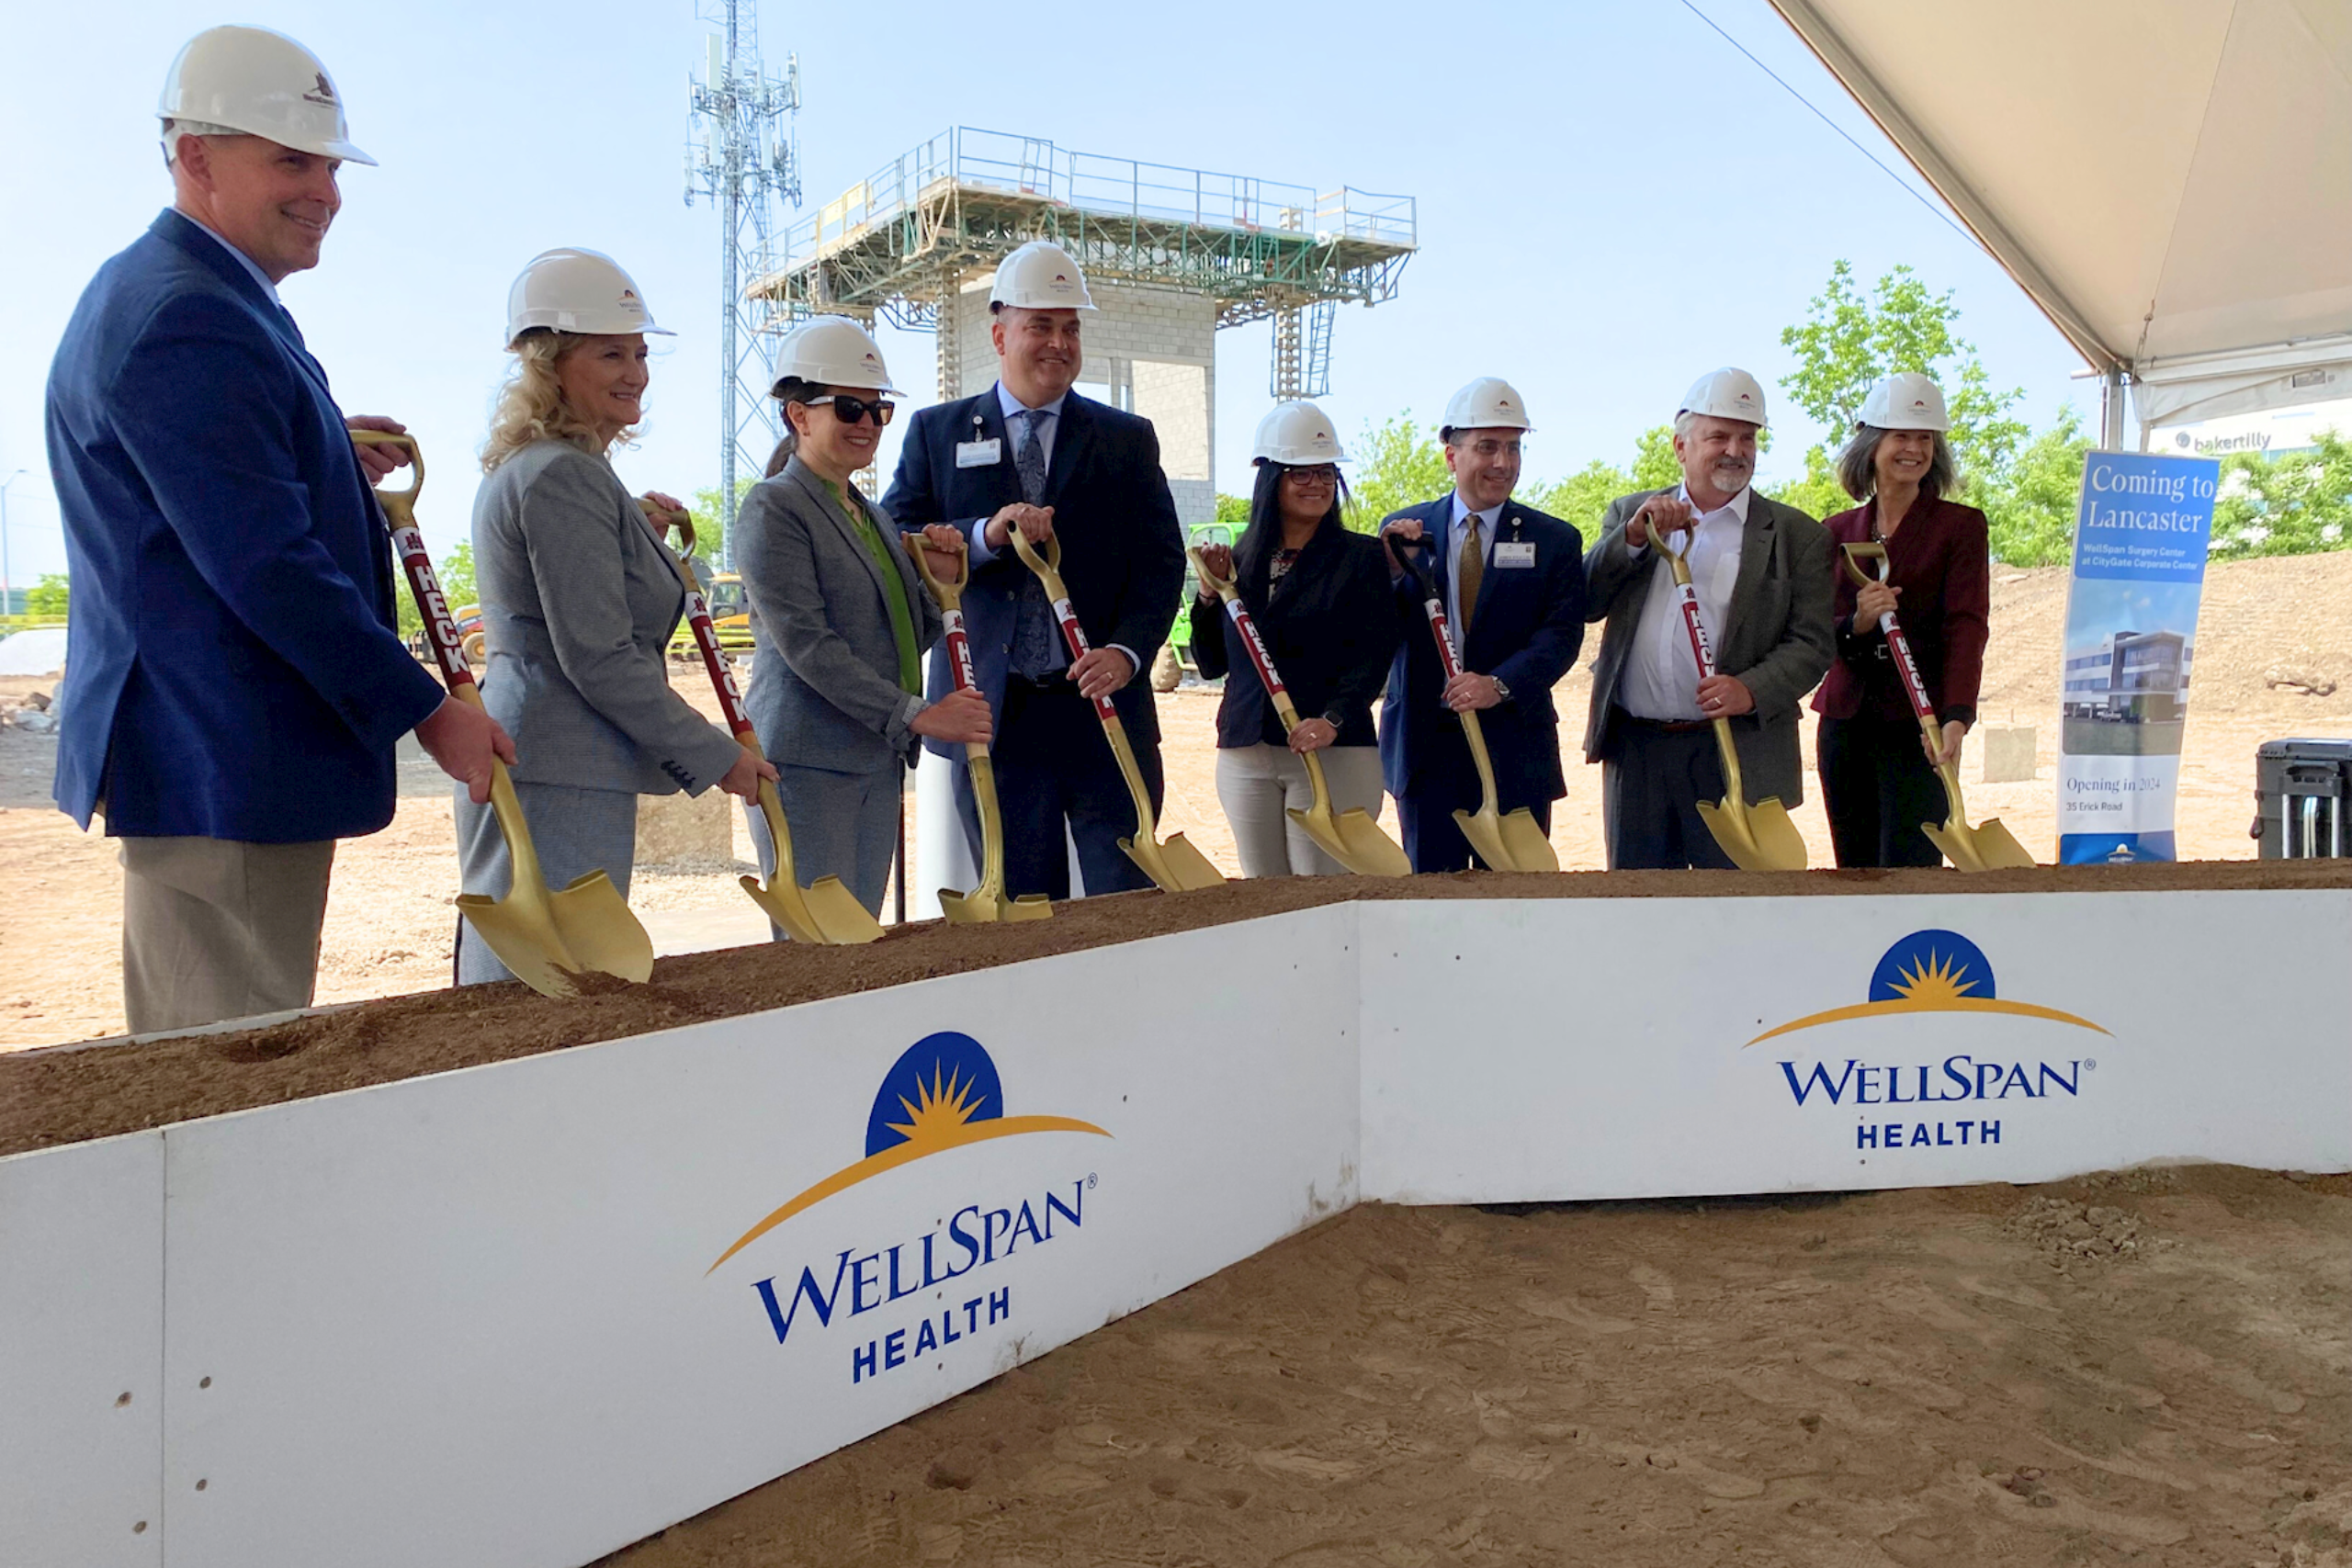 New Surgery Center is at the Heart of the WellSpan Expansion: Delivering Value-based Care for Patients